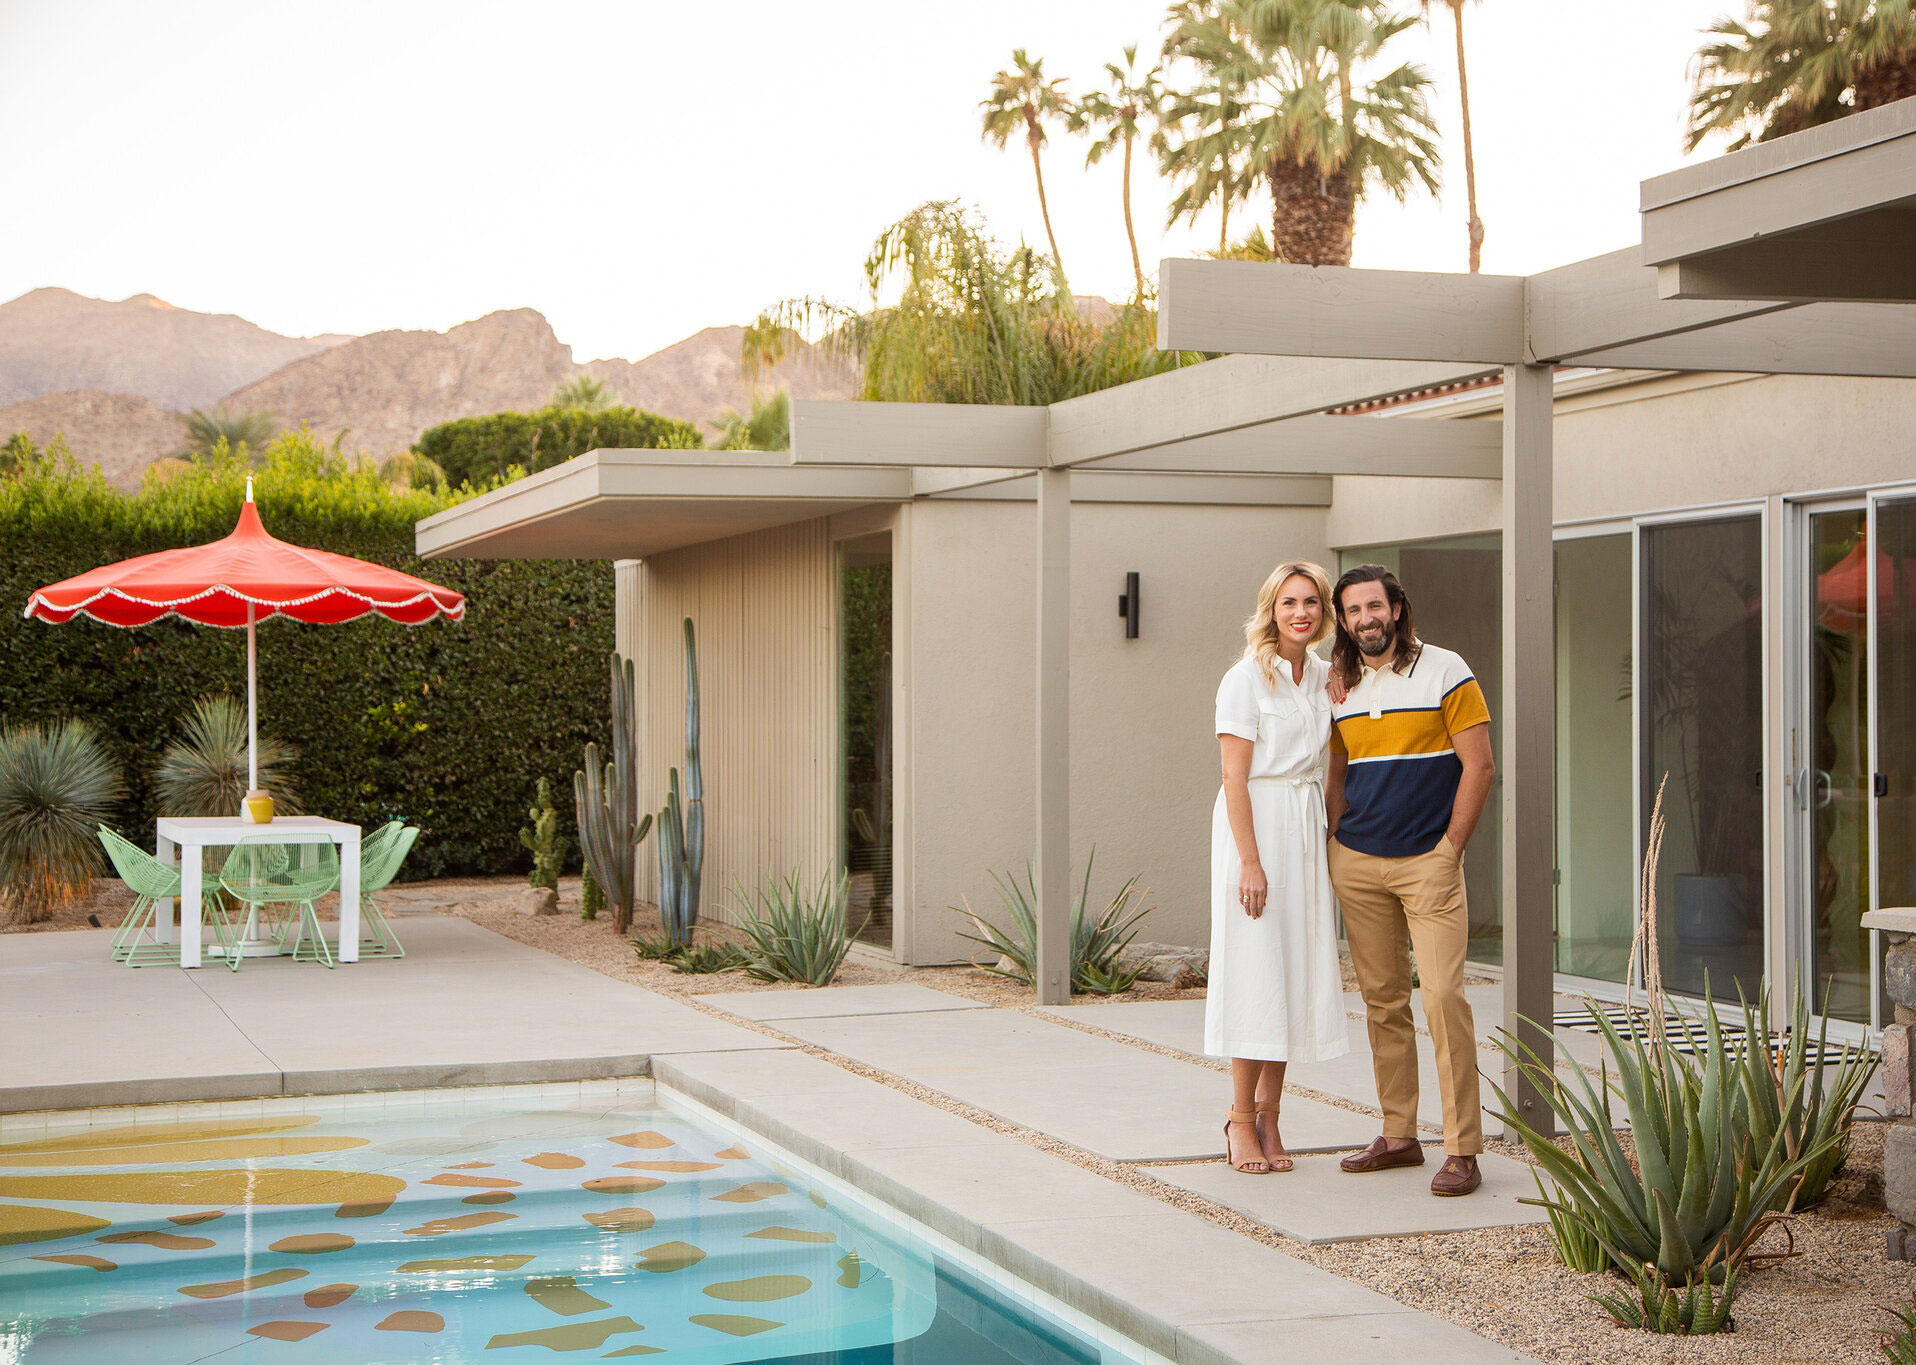 New colorful design for 1957 home in Palm Springs.